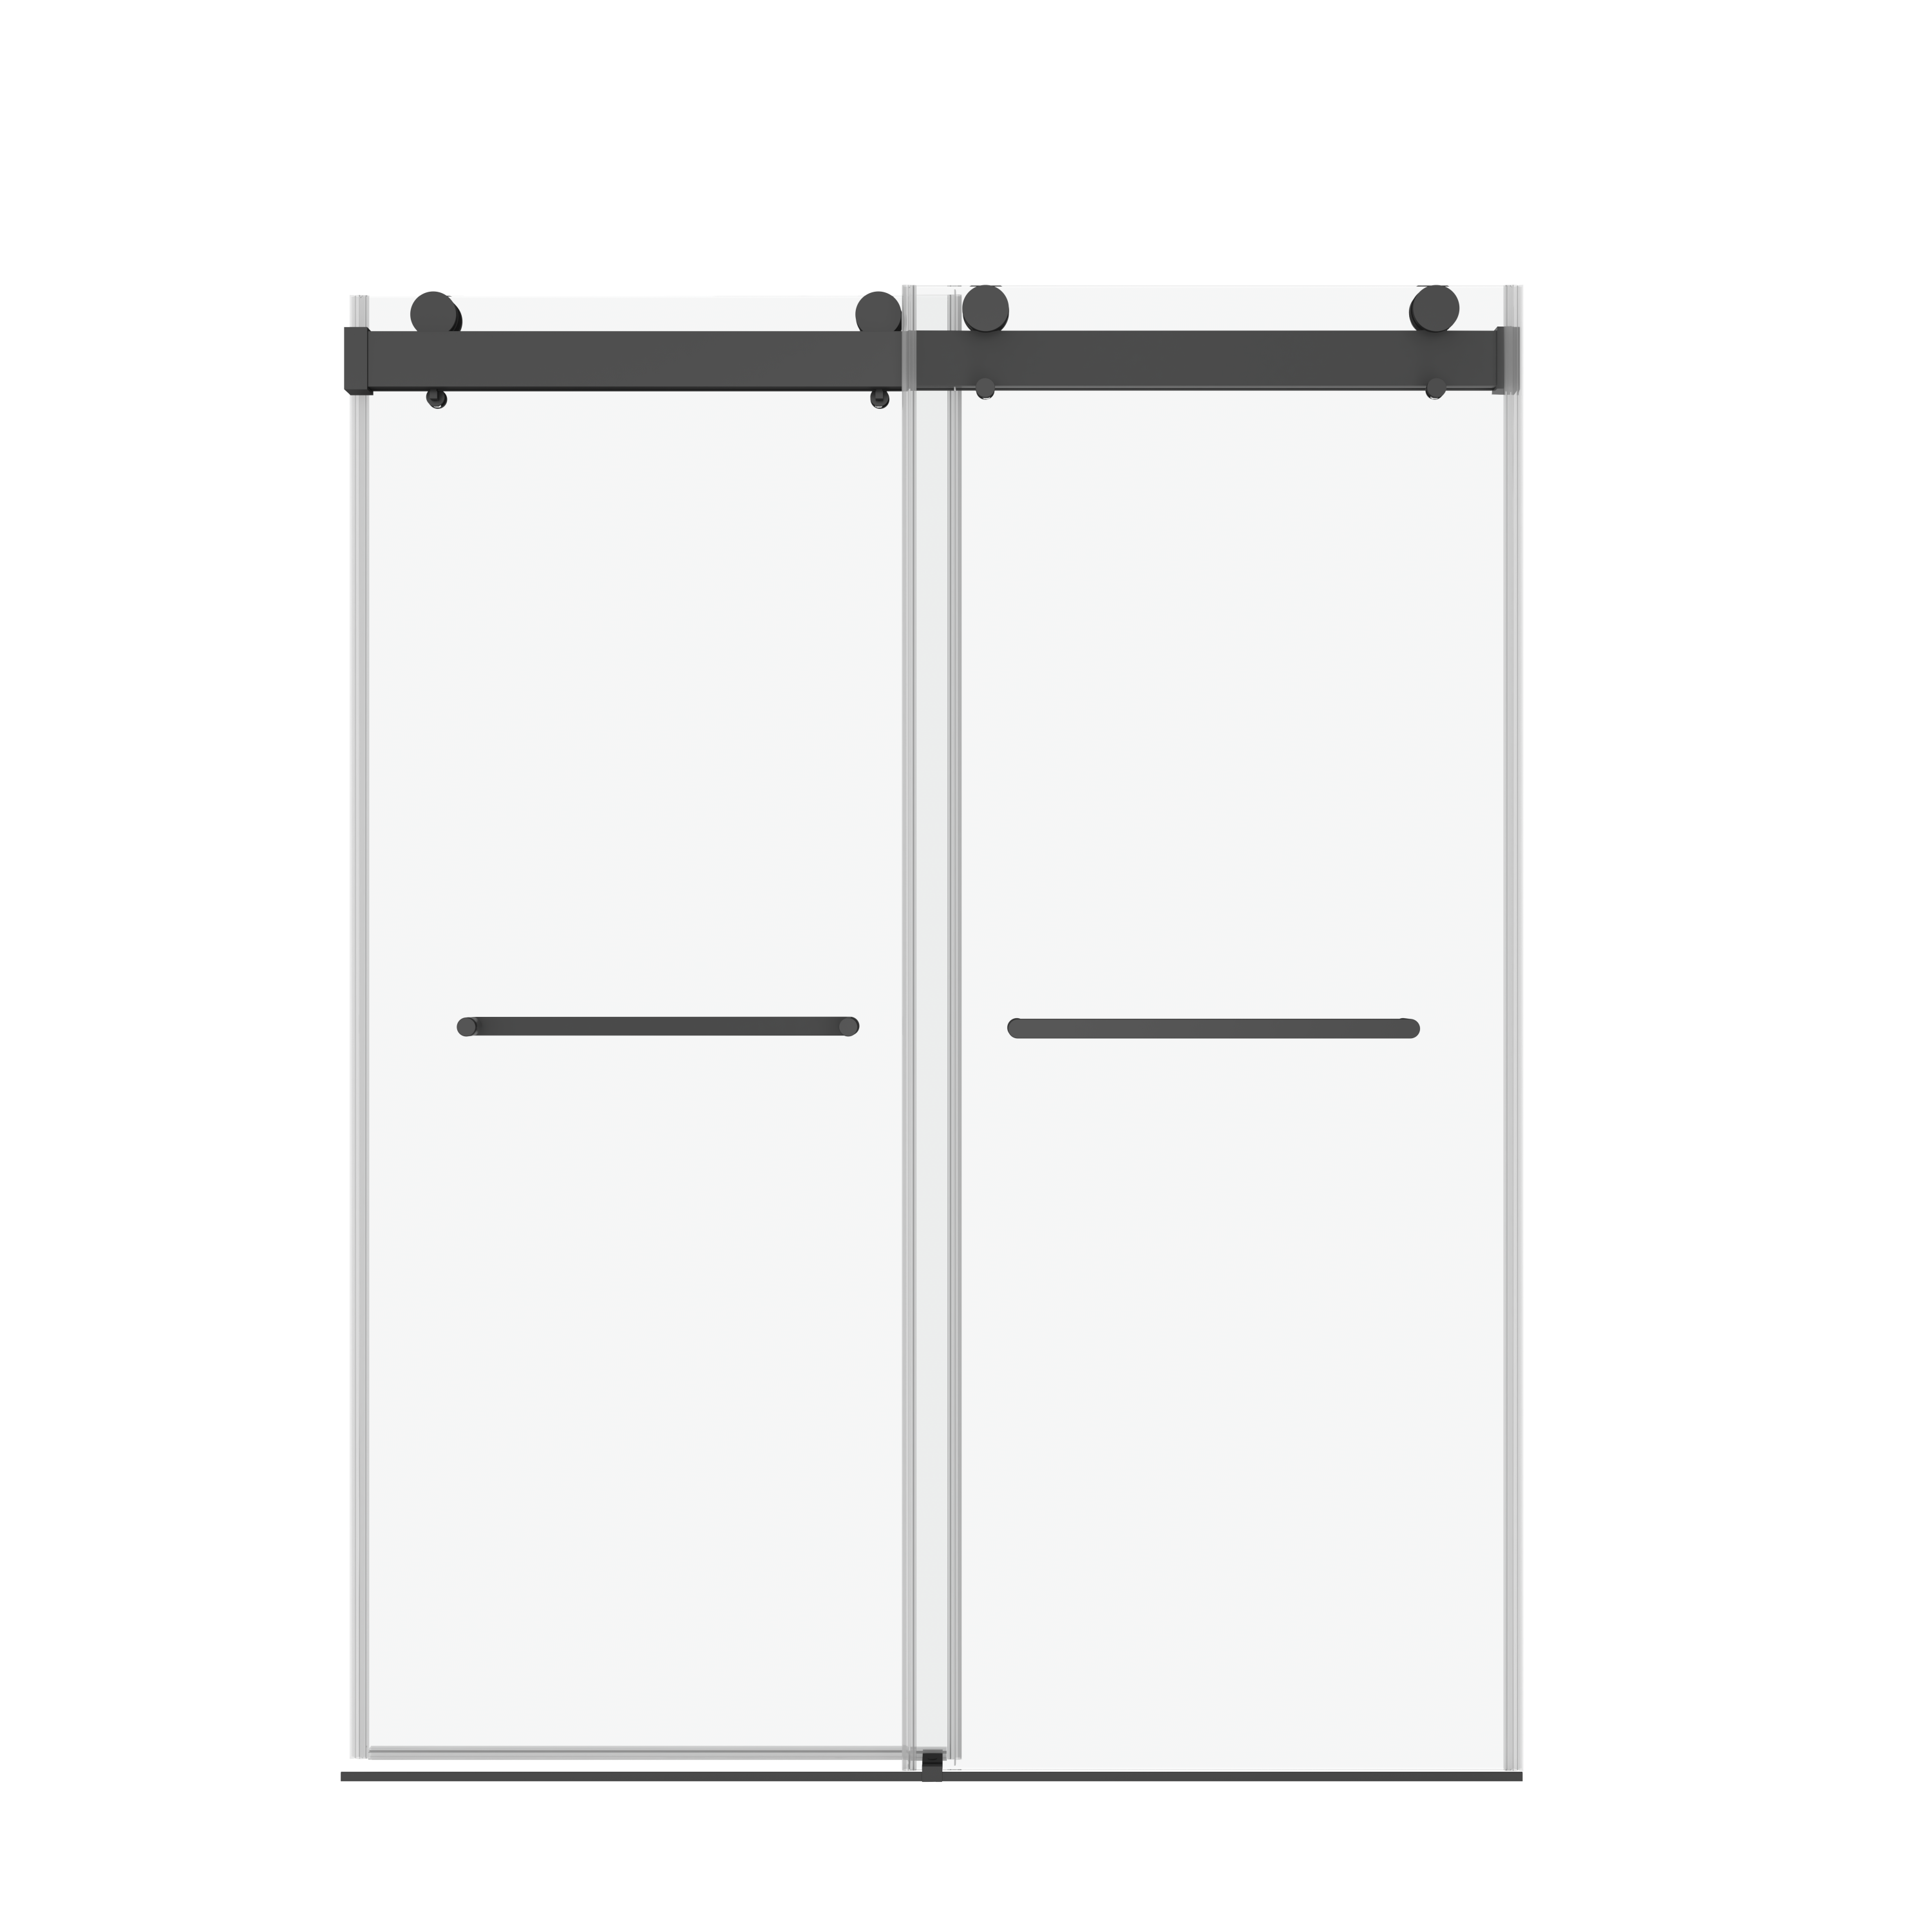 60" W x 76" H Double Sliding Frameless Soft-Close Shower Door with Premium 3/8 Inch